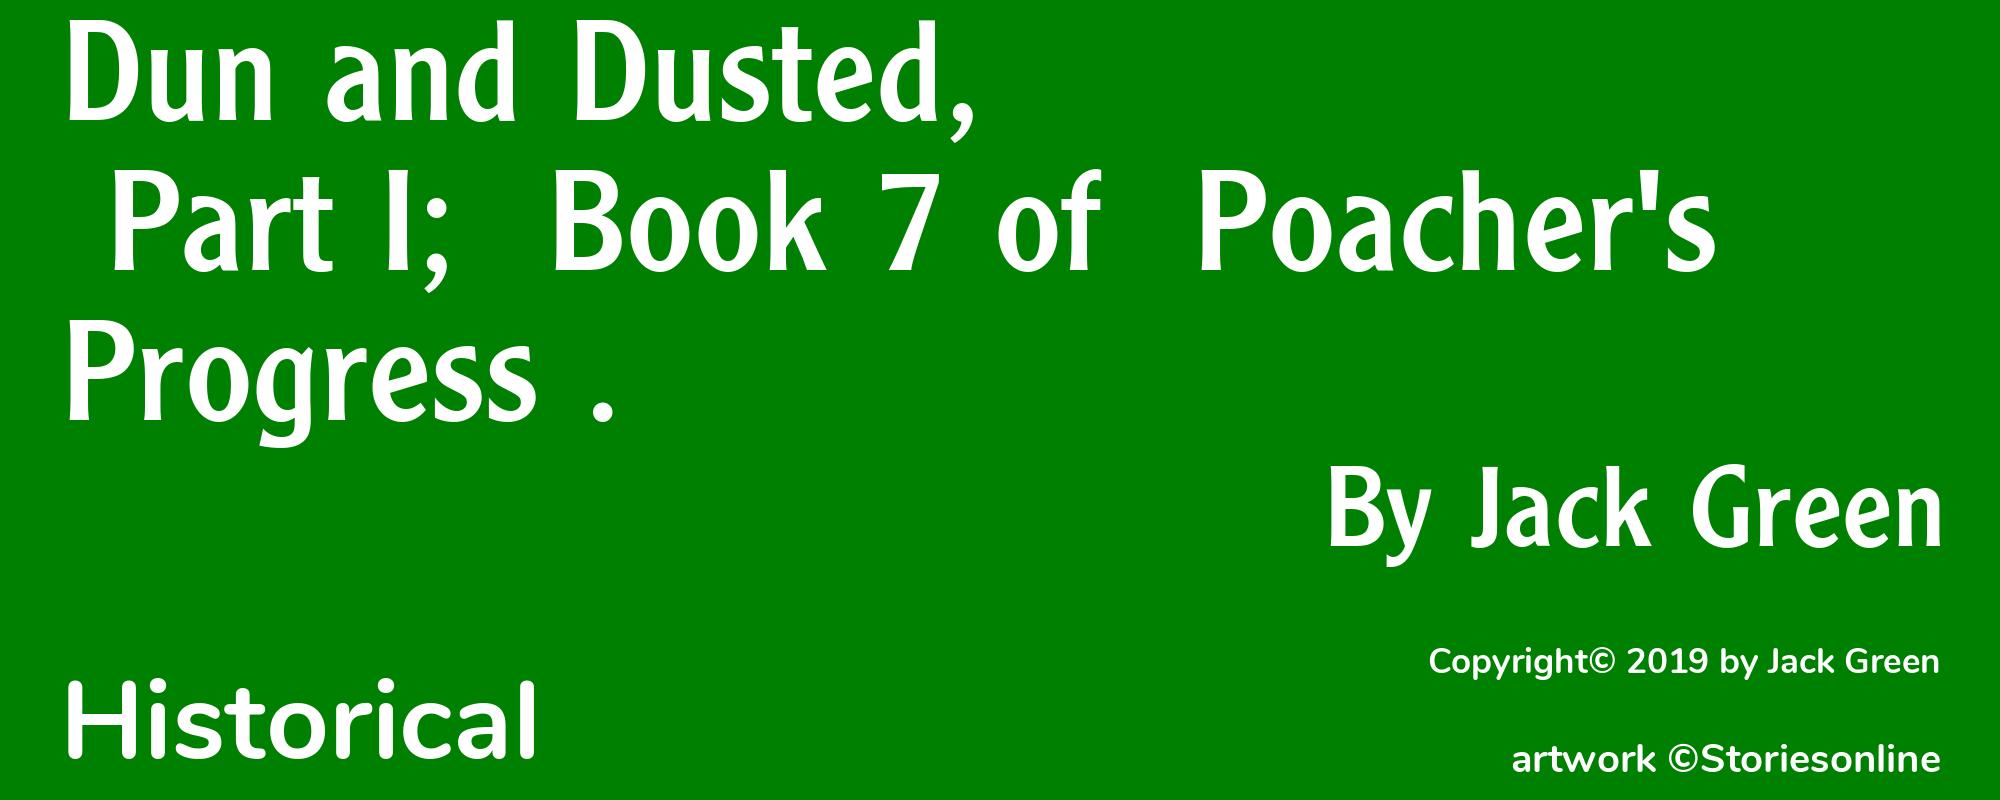 Dun and Dusted, Part I;  Book 7 of  Poacher's Progress . - Cover